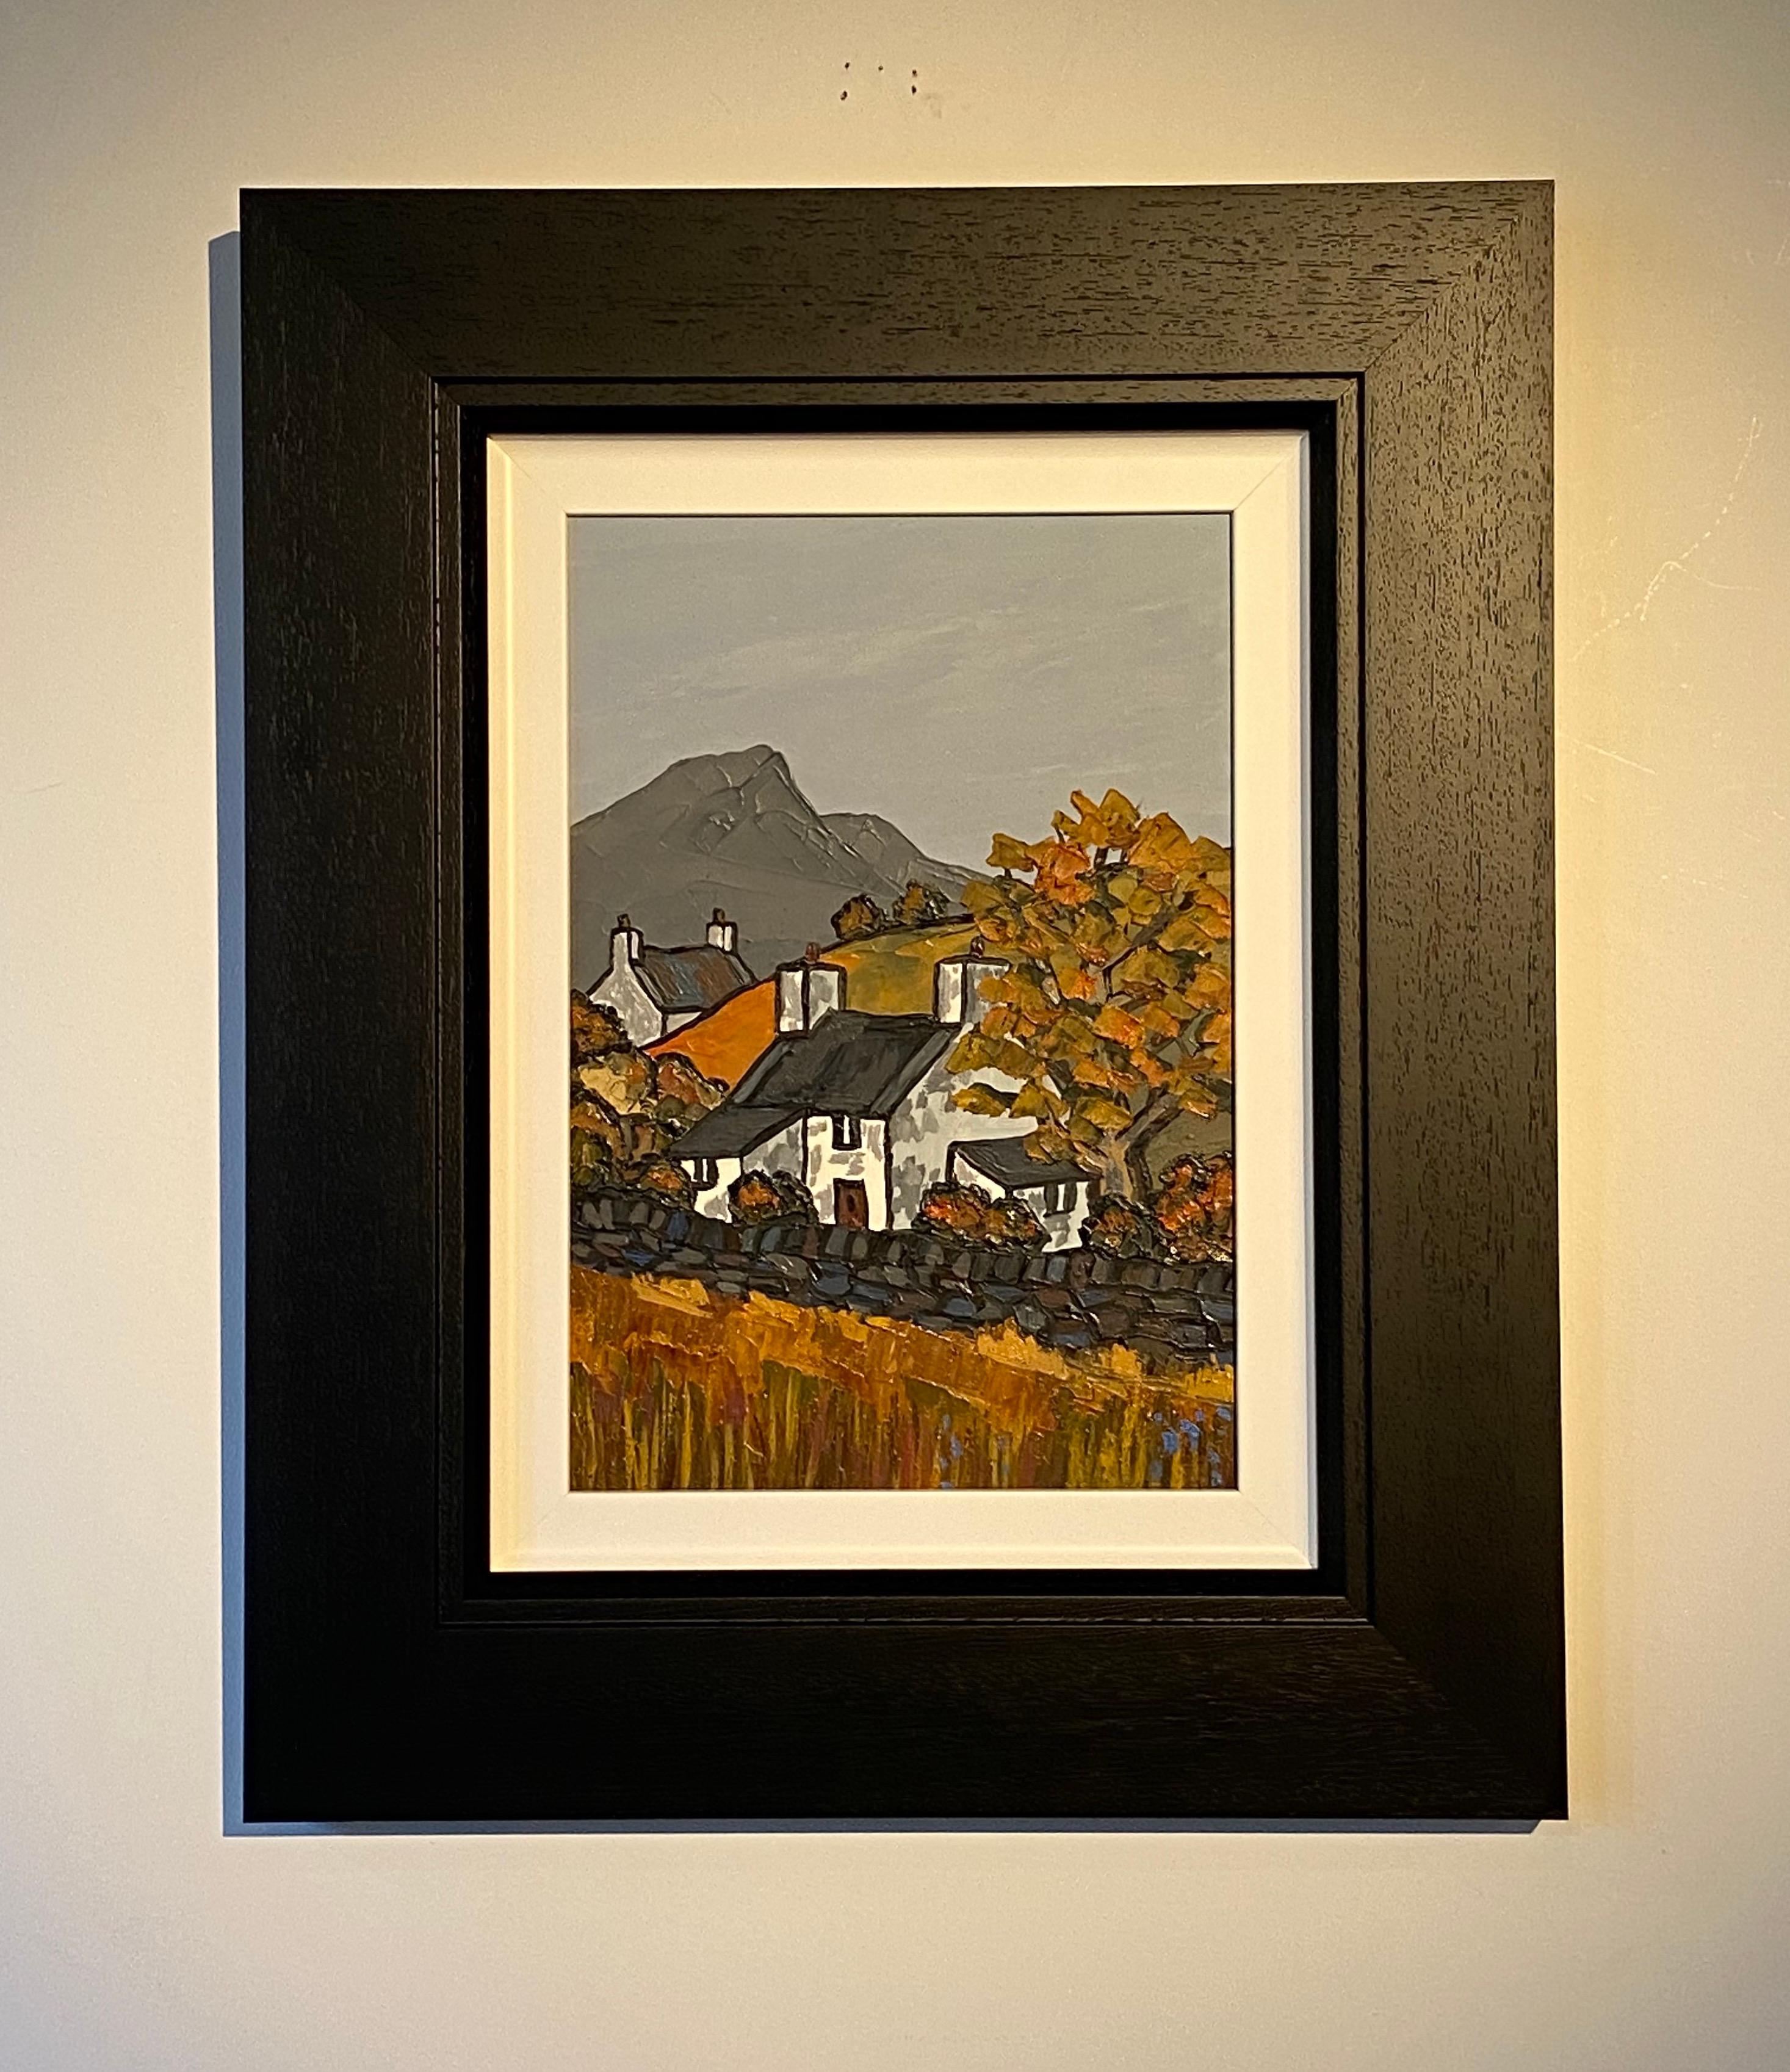 'In the Rhinogs'' by David Barnes is a Contemporary Welsh Landscape Painting.

Barnes captures the greys and browns of North Wales landscapes with brooding intensity, but he also utilises arresting splashes of colour reminiscent of the Scottish